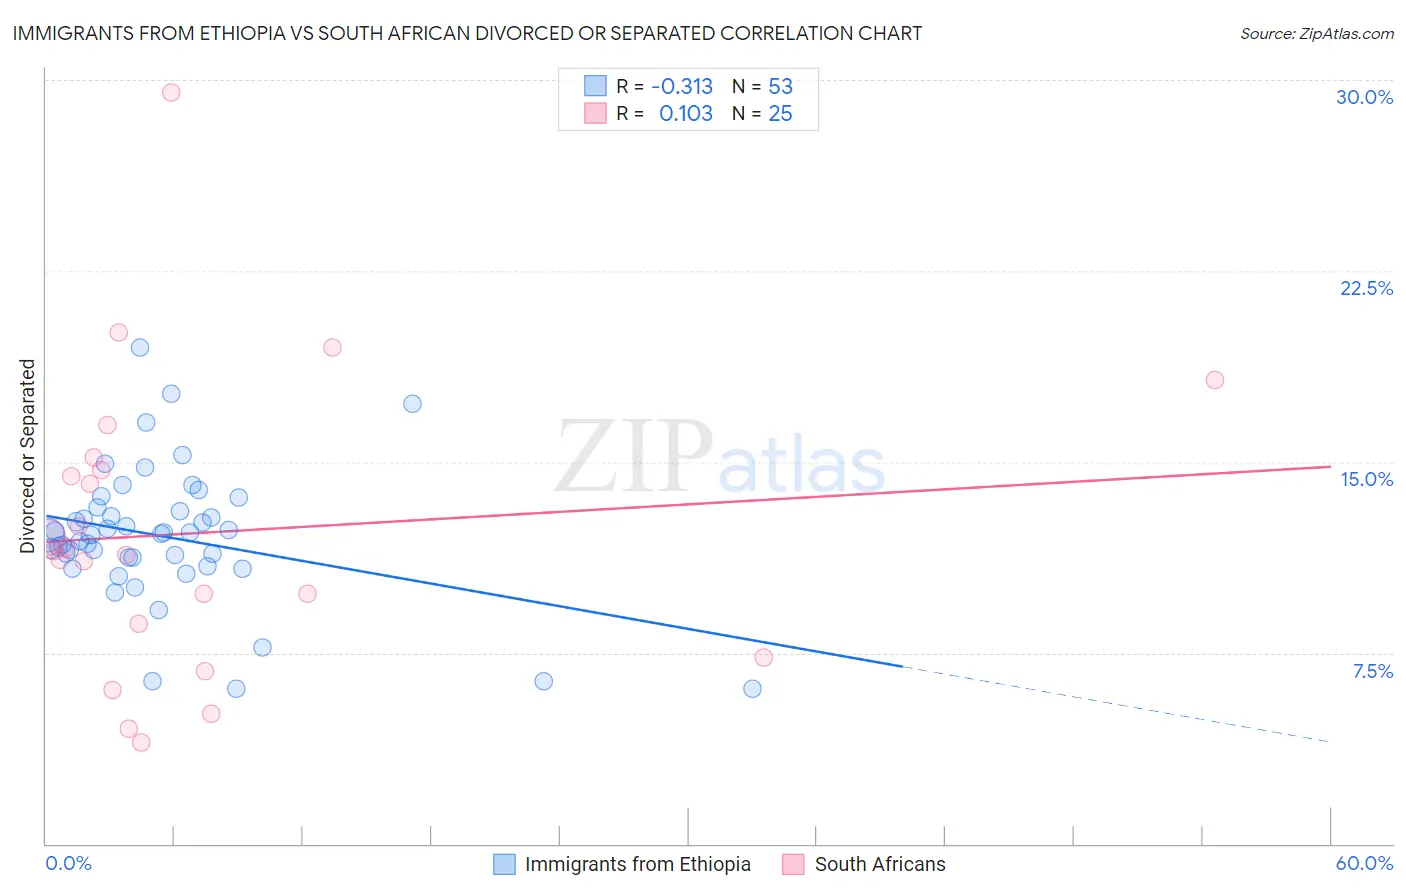 Immigrants from Ethiopia vs South African Divorced or Separated